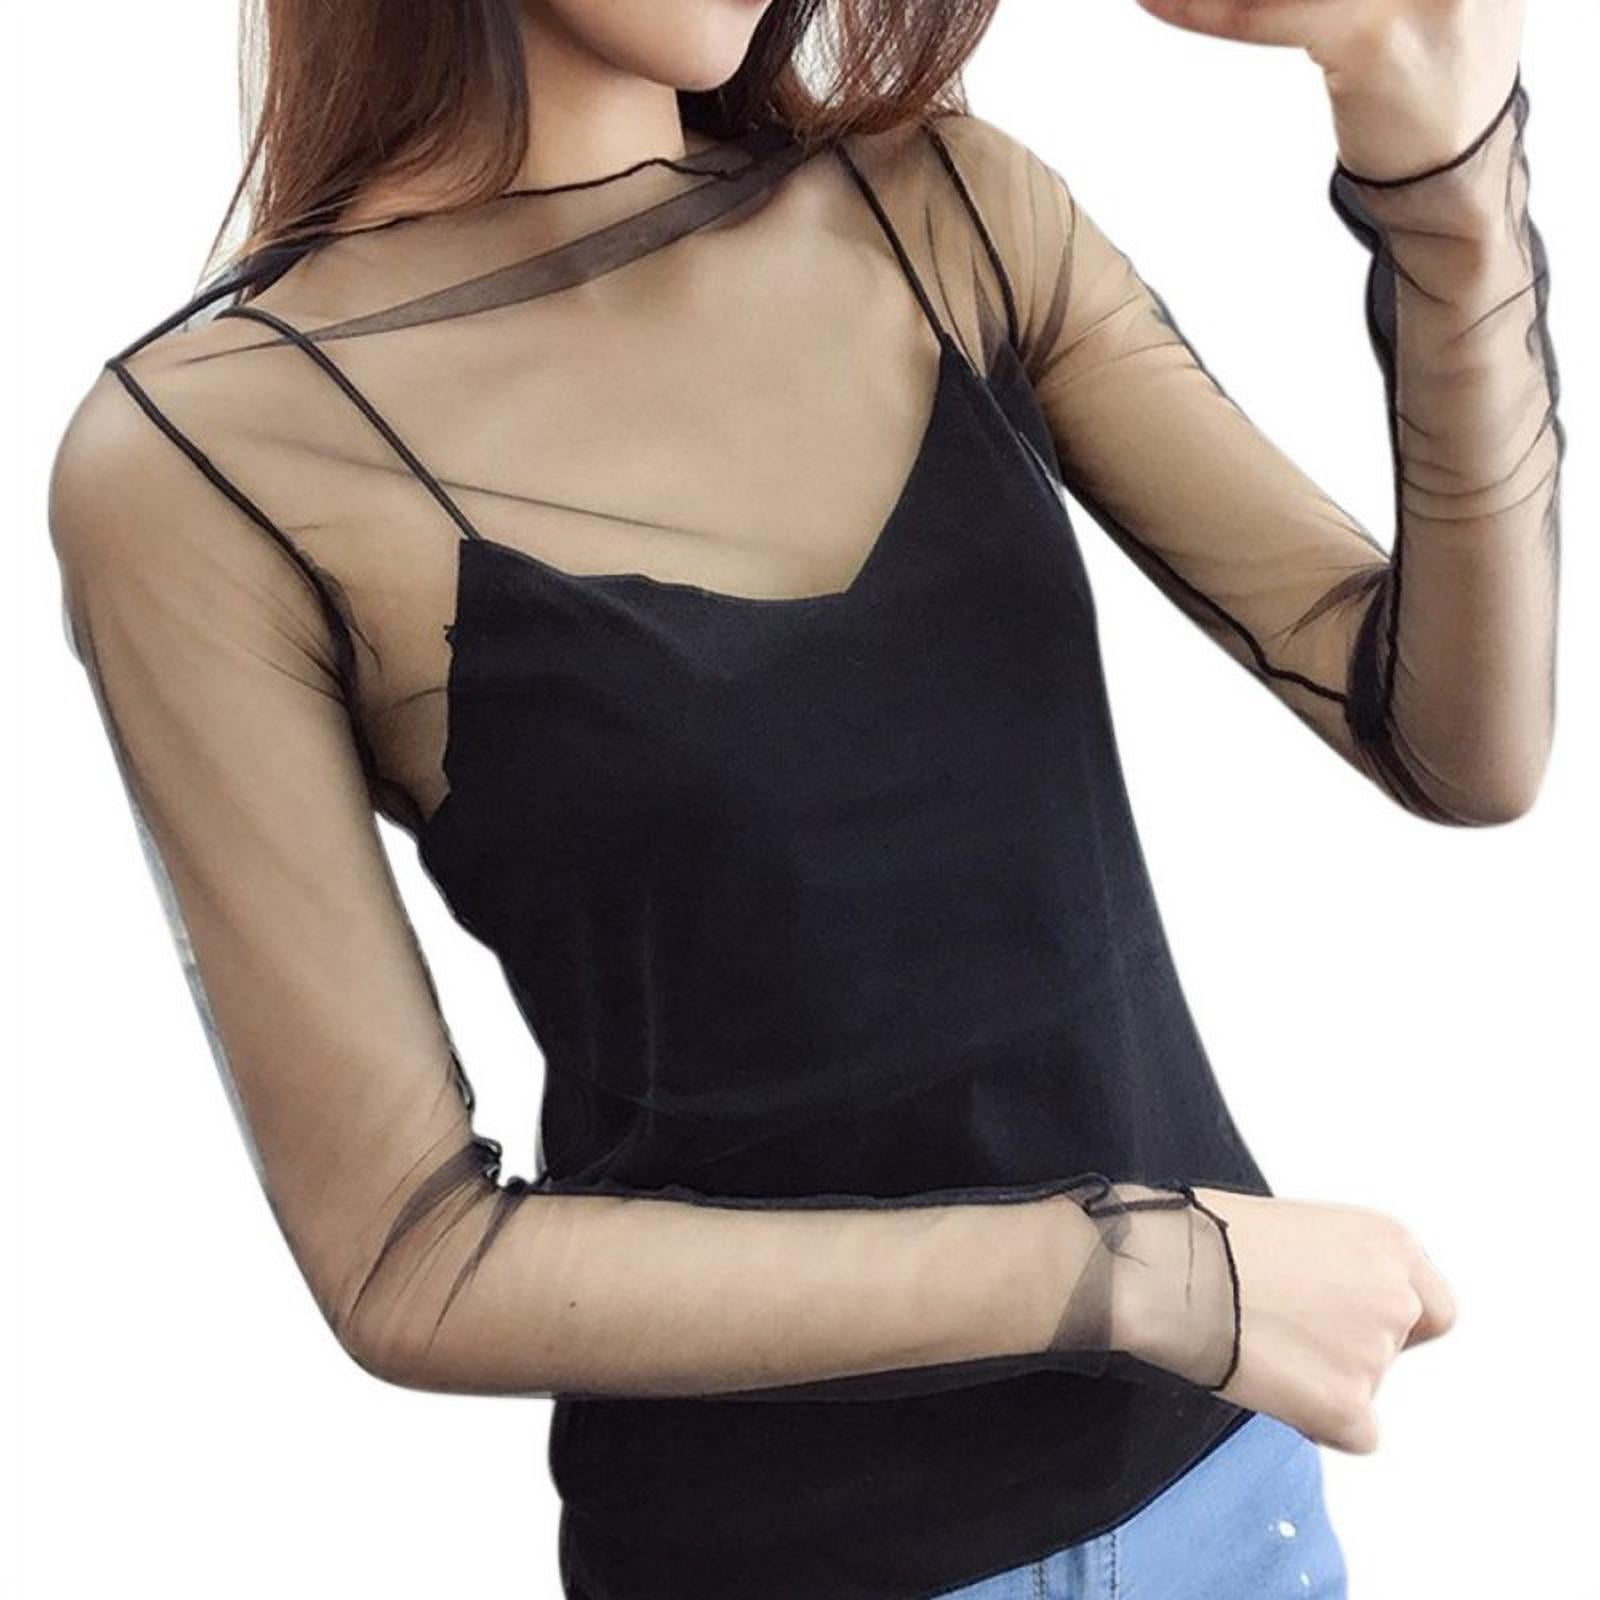 Trends Mesh Women Long Sleeve Tops Hot Sexy Transparent High Neck Black  Lace Bottoming Shirts Punk Chic T Shirt Wome